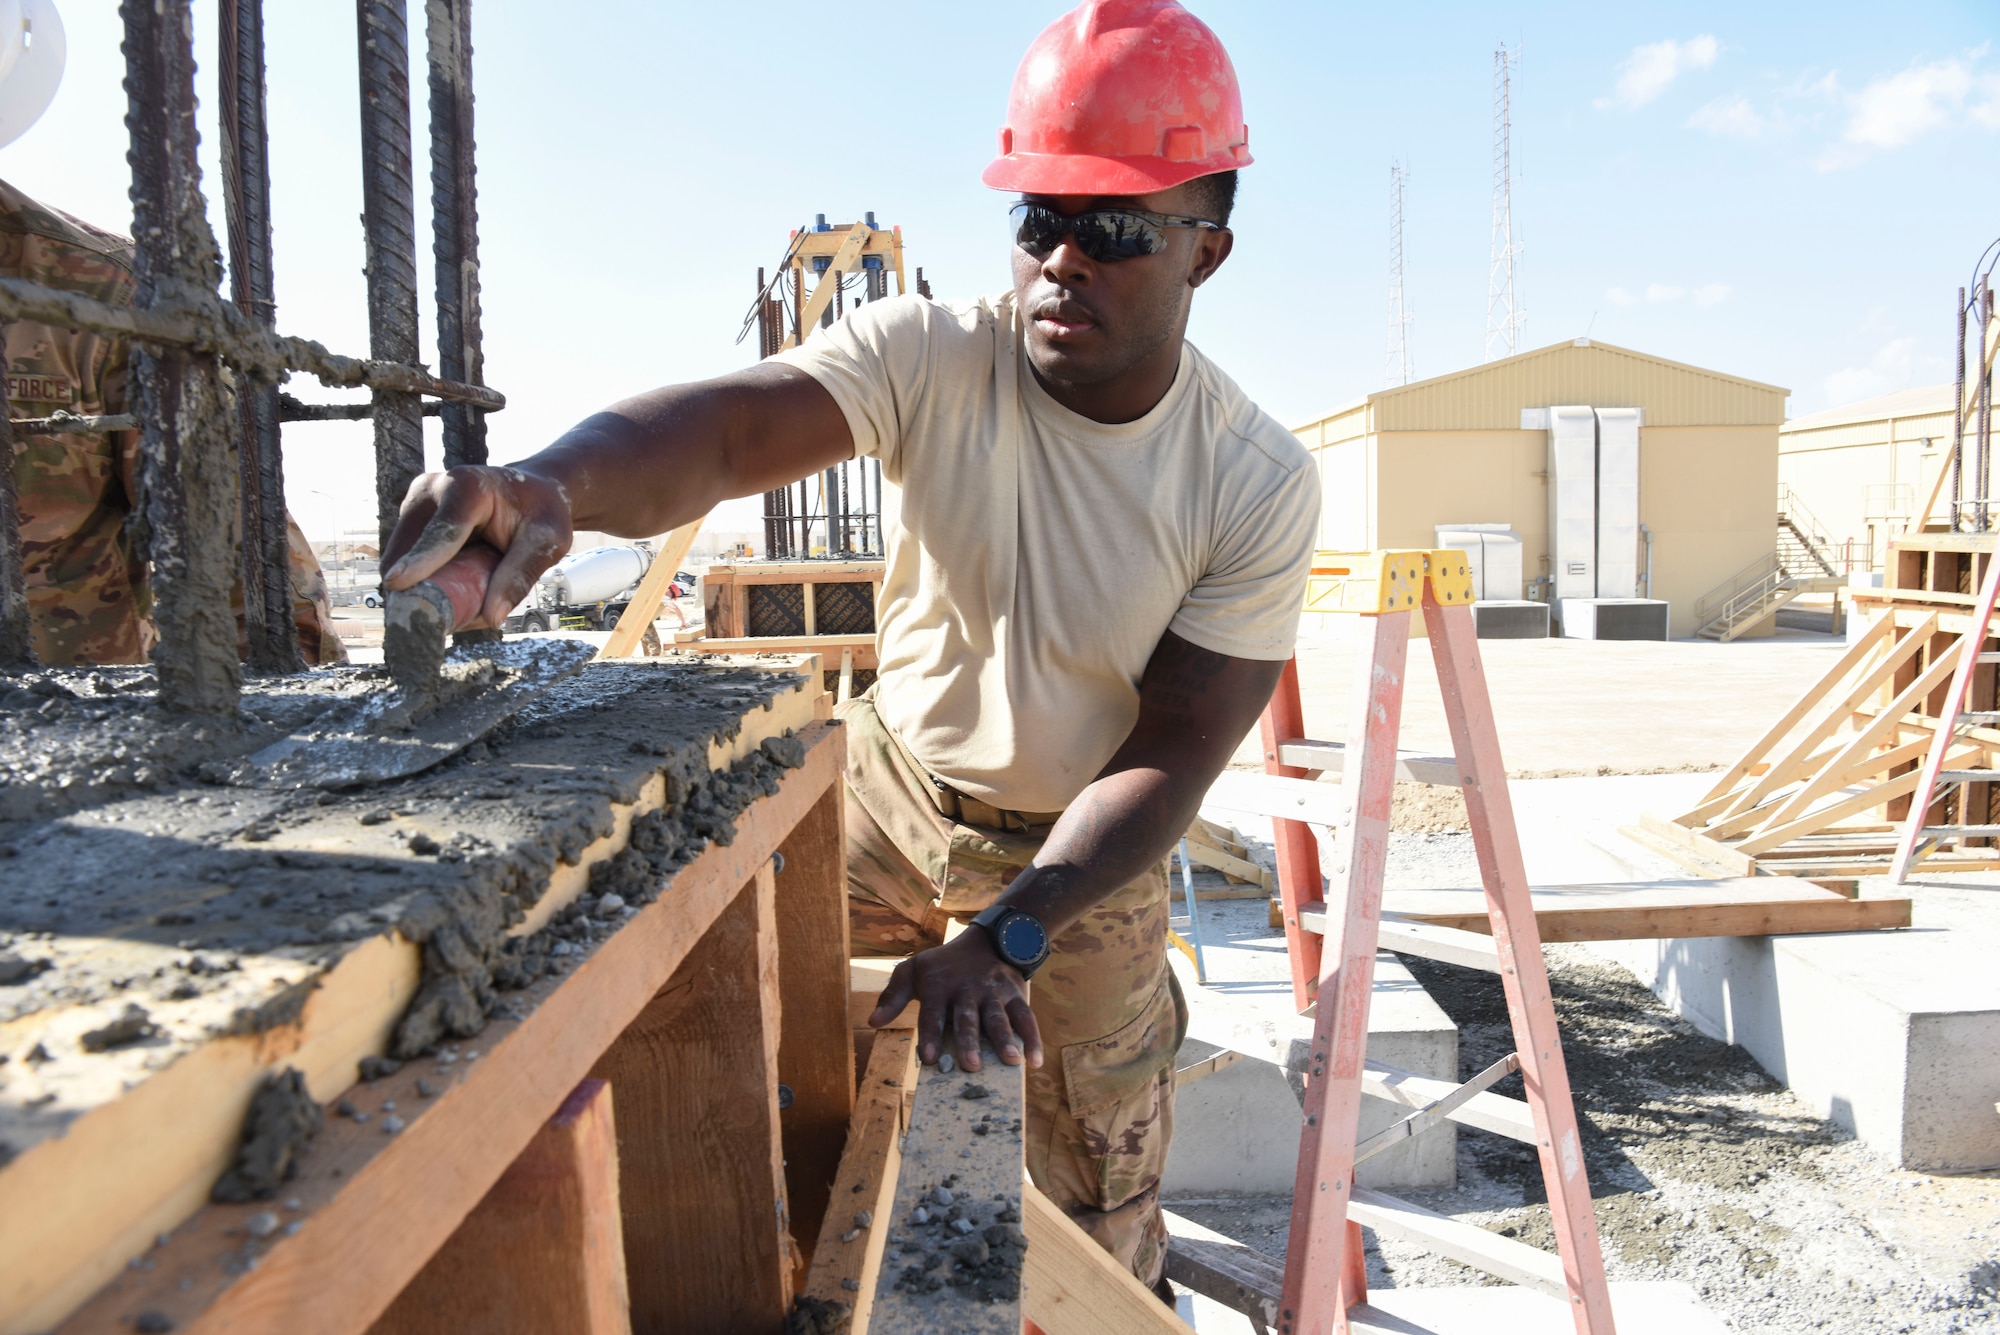 Senior Airman Dekota Newson, 577th Expeditionary Prime Base Engineer Emergency Force heavy equipment operator, remove excess cement from the foundation system to support a build during construction, Dec. 23, 2018 at Al Dhafra Air Base, United Arab Emirates.